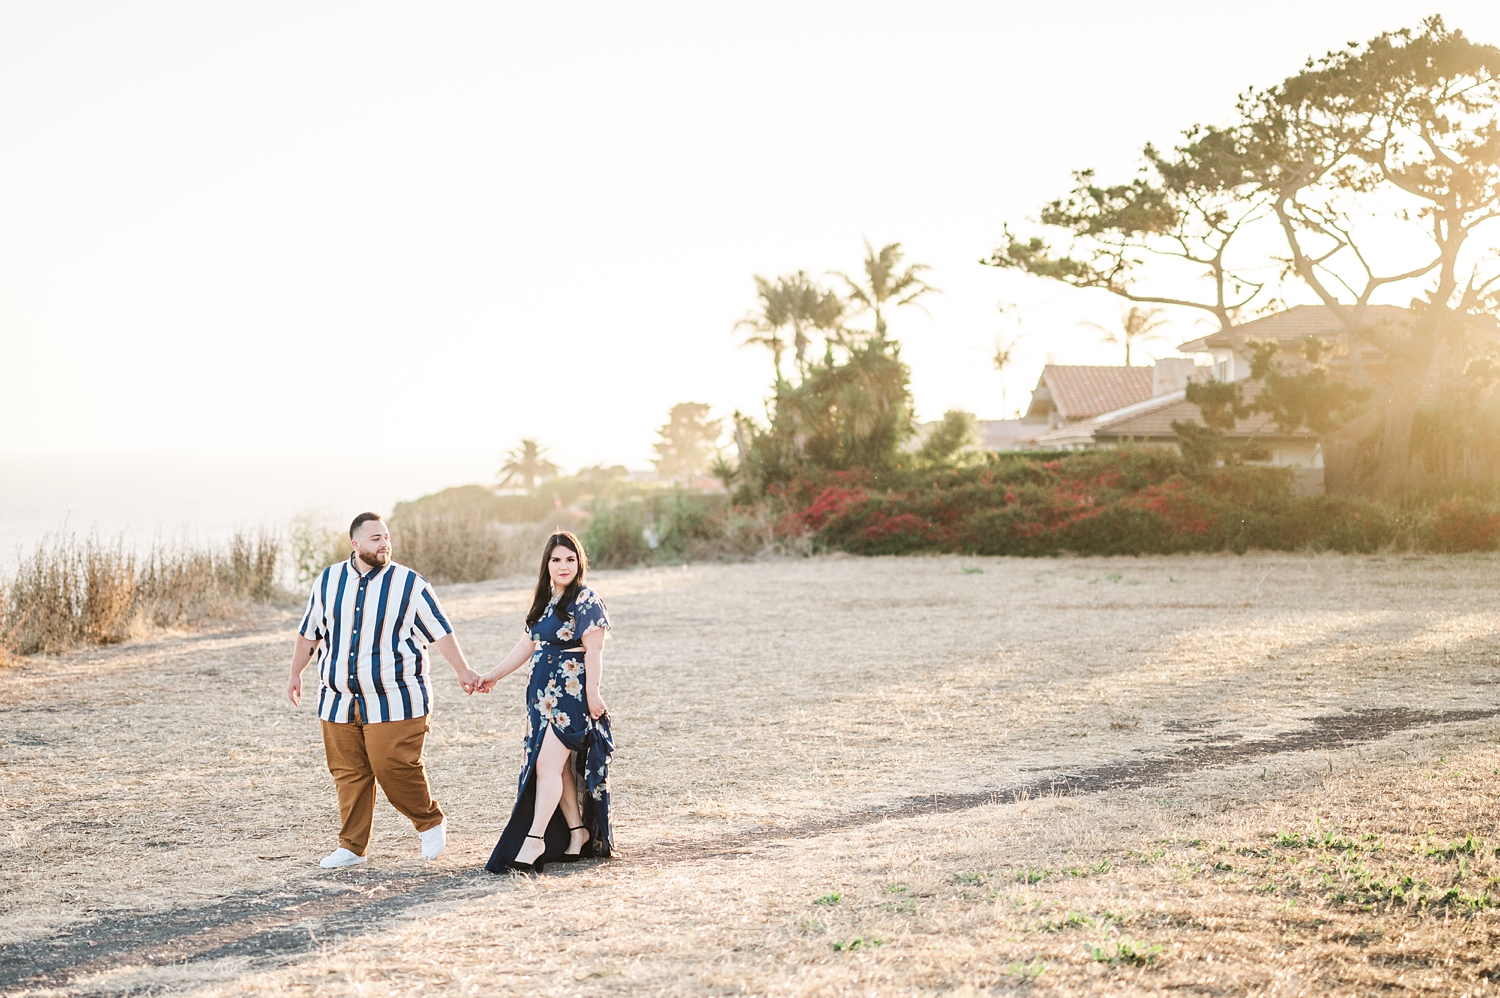 Beach Cliffs Engagement Session at Sunset | Nataly Hernandez Photography | Edwin and Susana-57.jpg